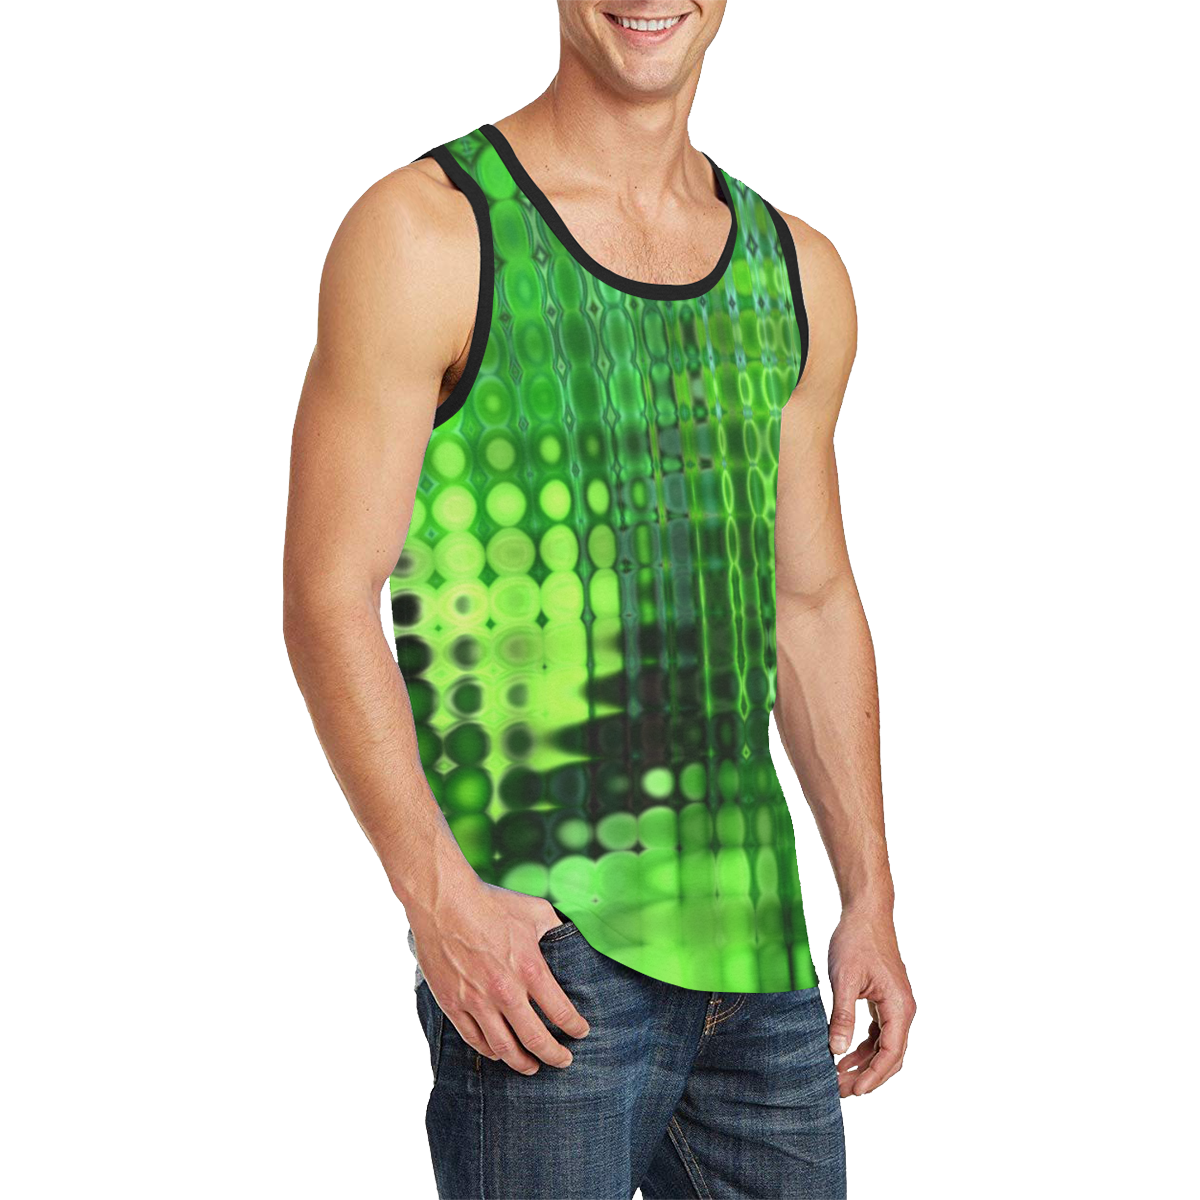 It's Wet in the Jungle Men's All Over Print Tank Top (Model T57)